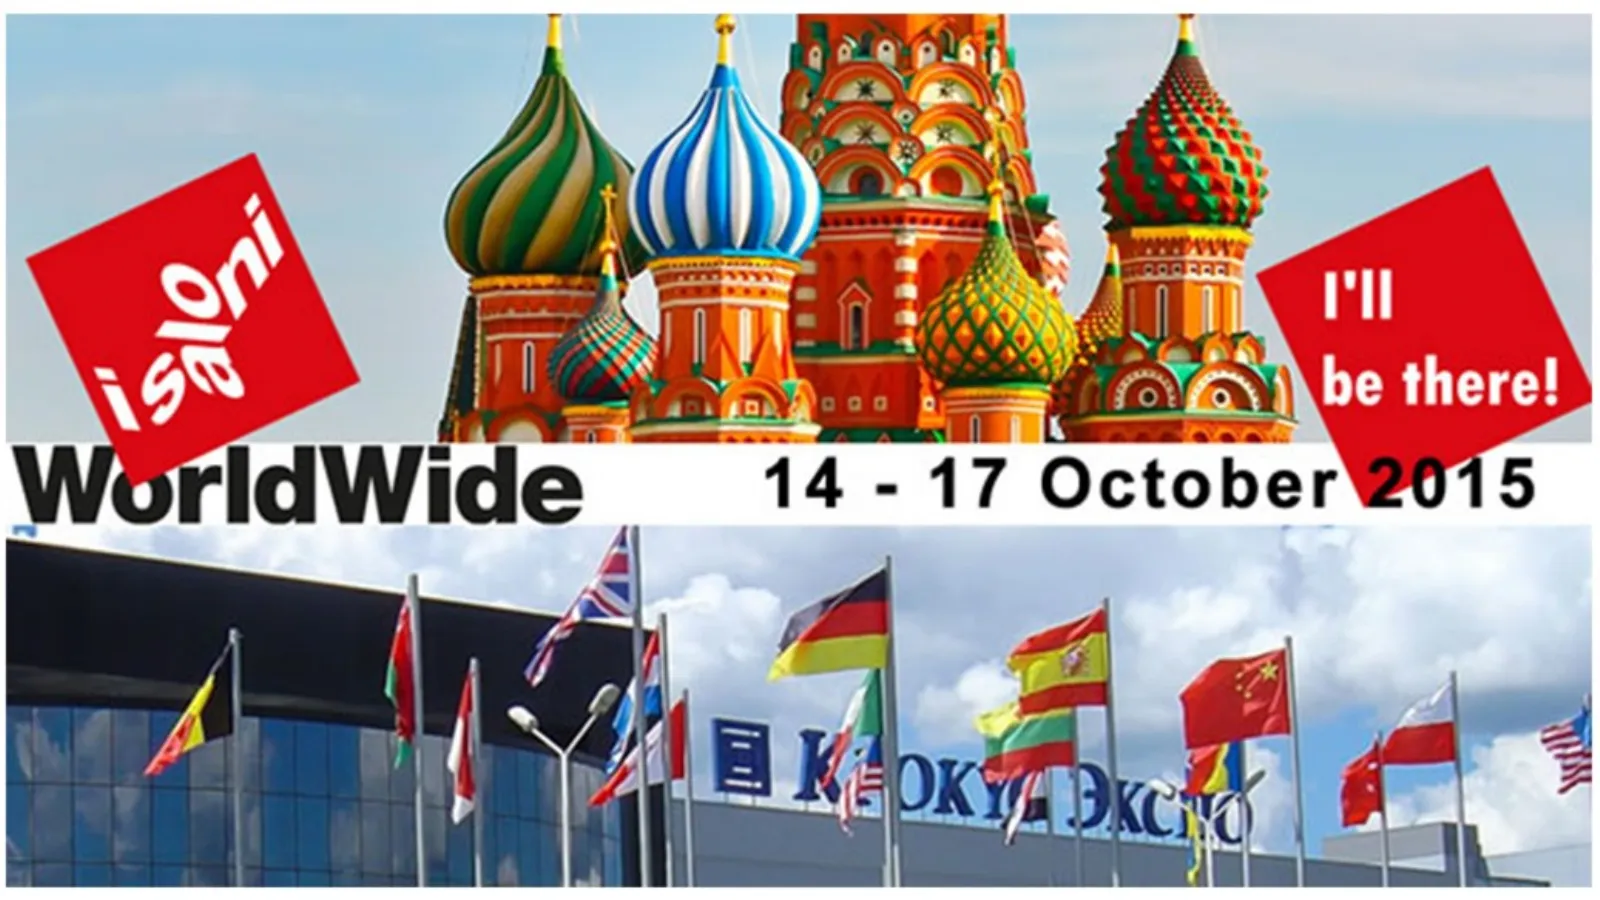 The Salons WorldWide Moscow 2015